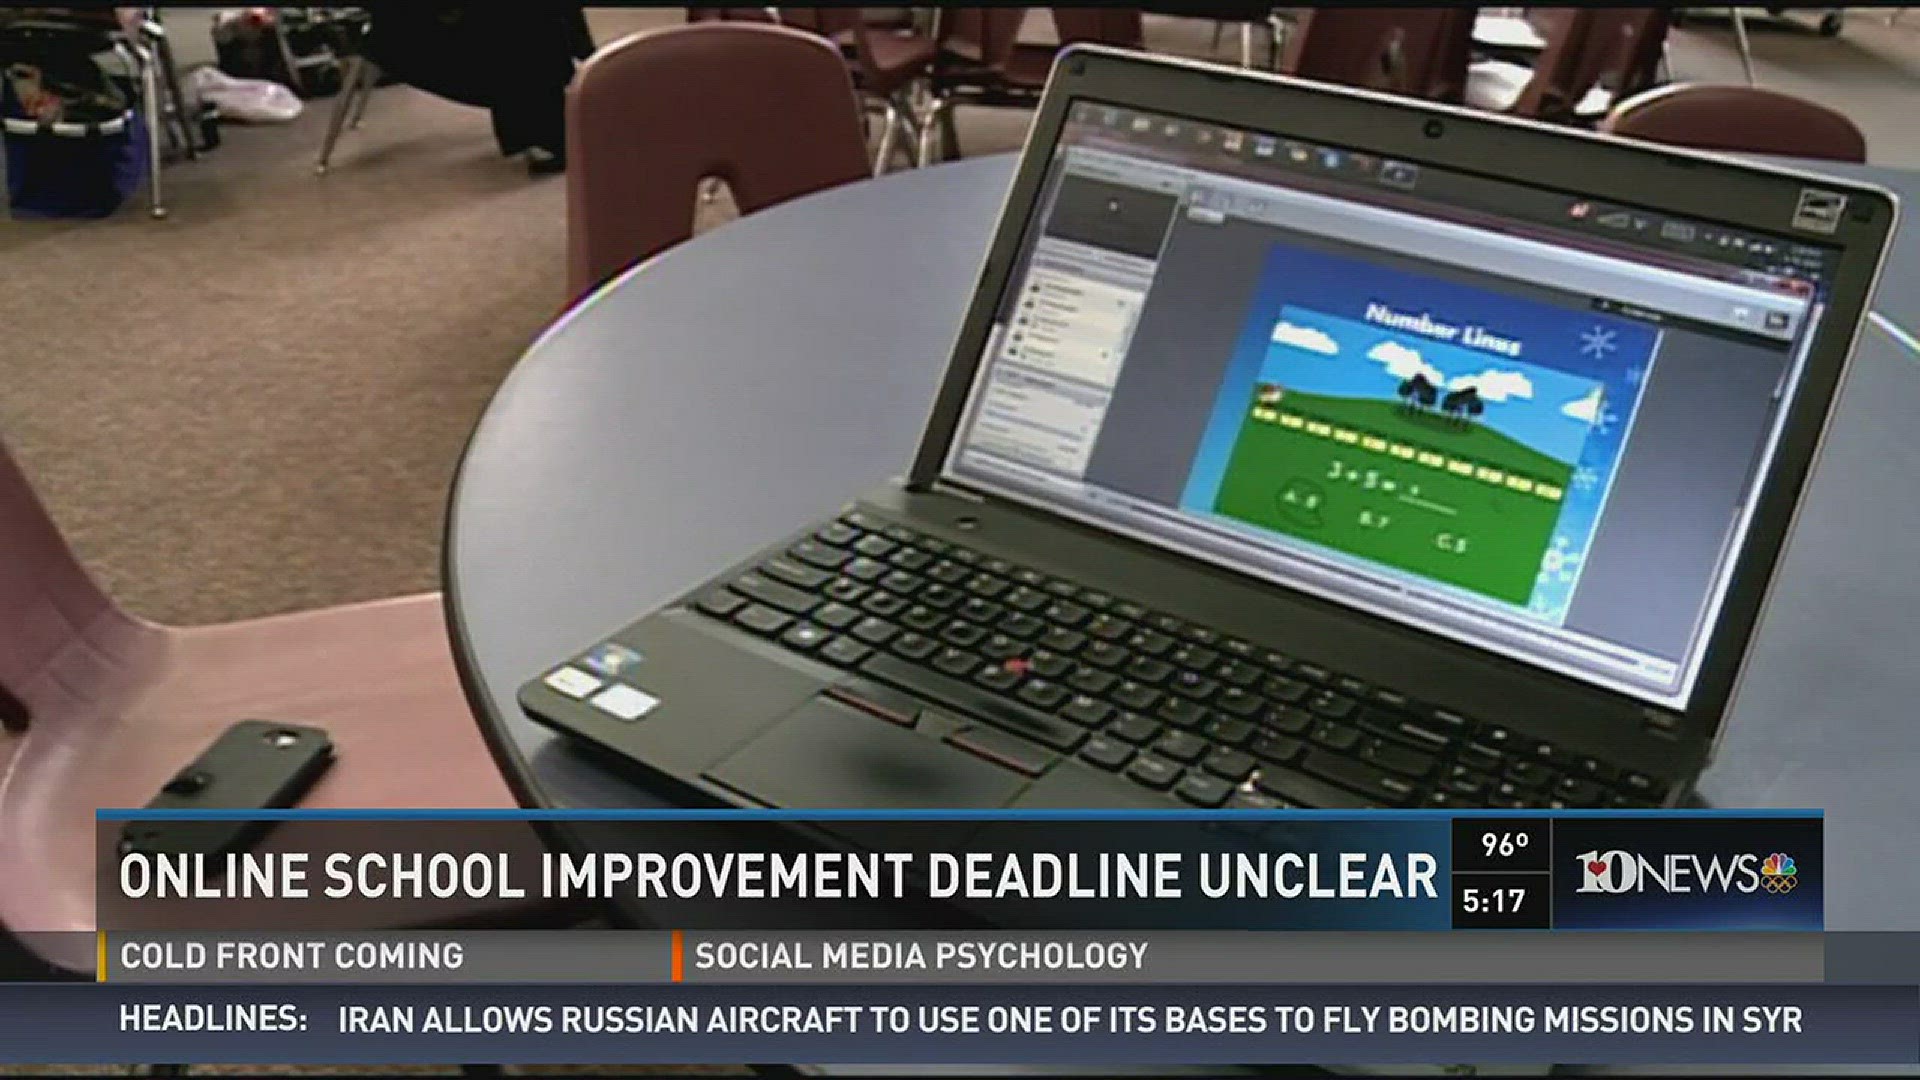 The Tennessee Department of Education says the Tennessee Virtual Academy has one more year to improve test scores or face state intervention, but the Director of Schools believes they should have more time.